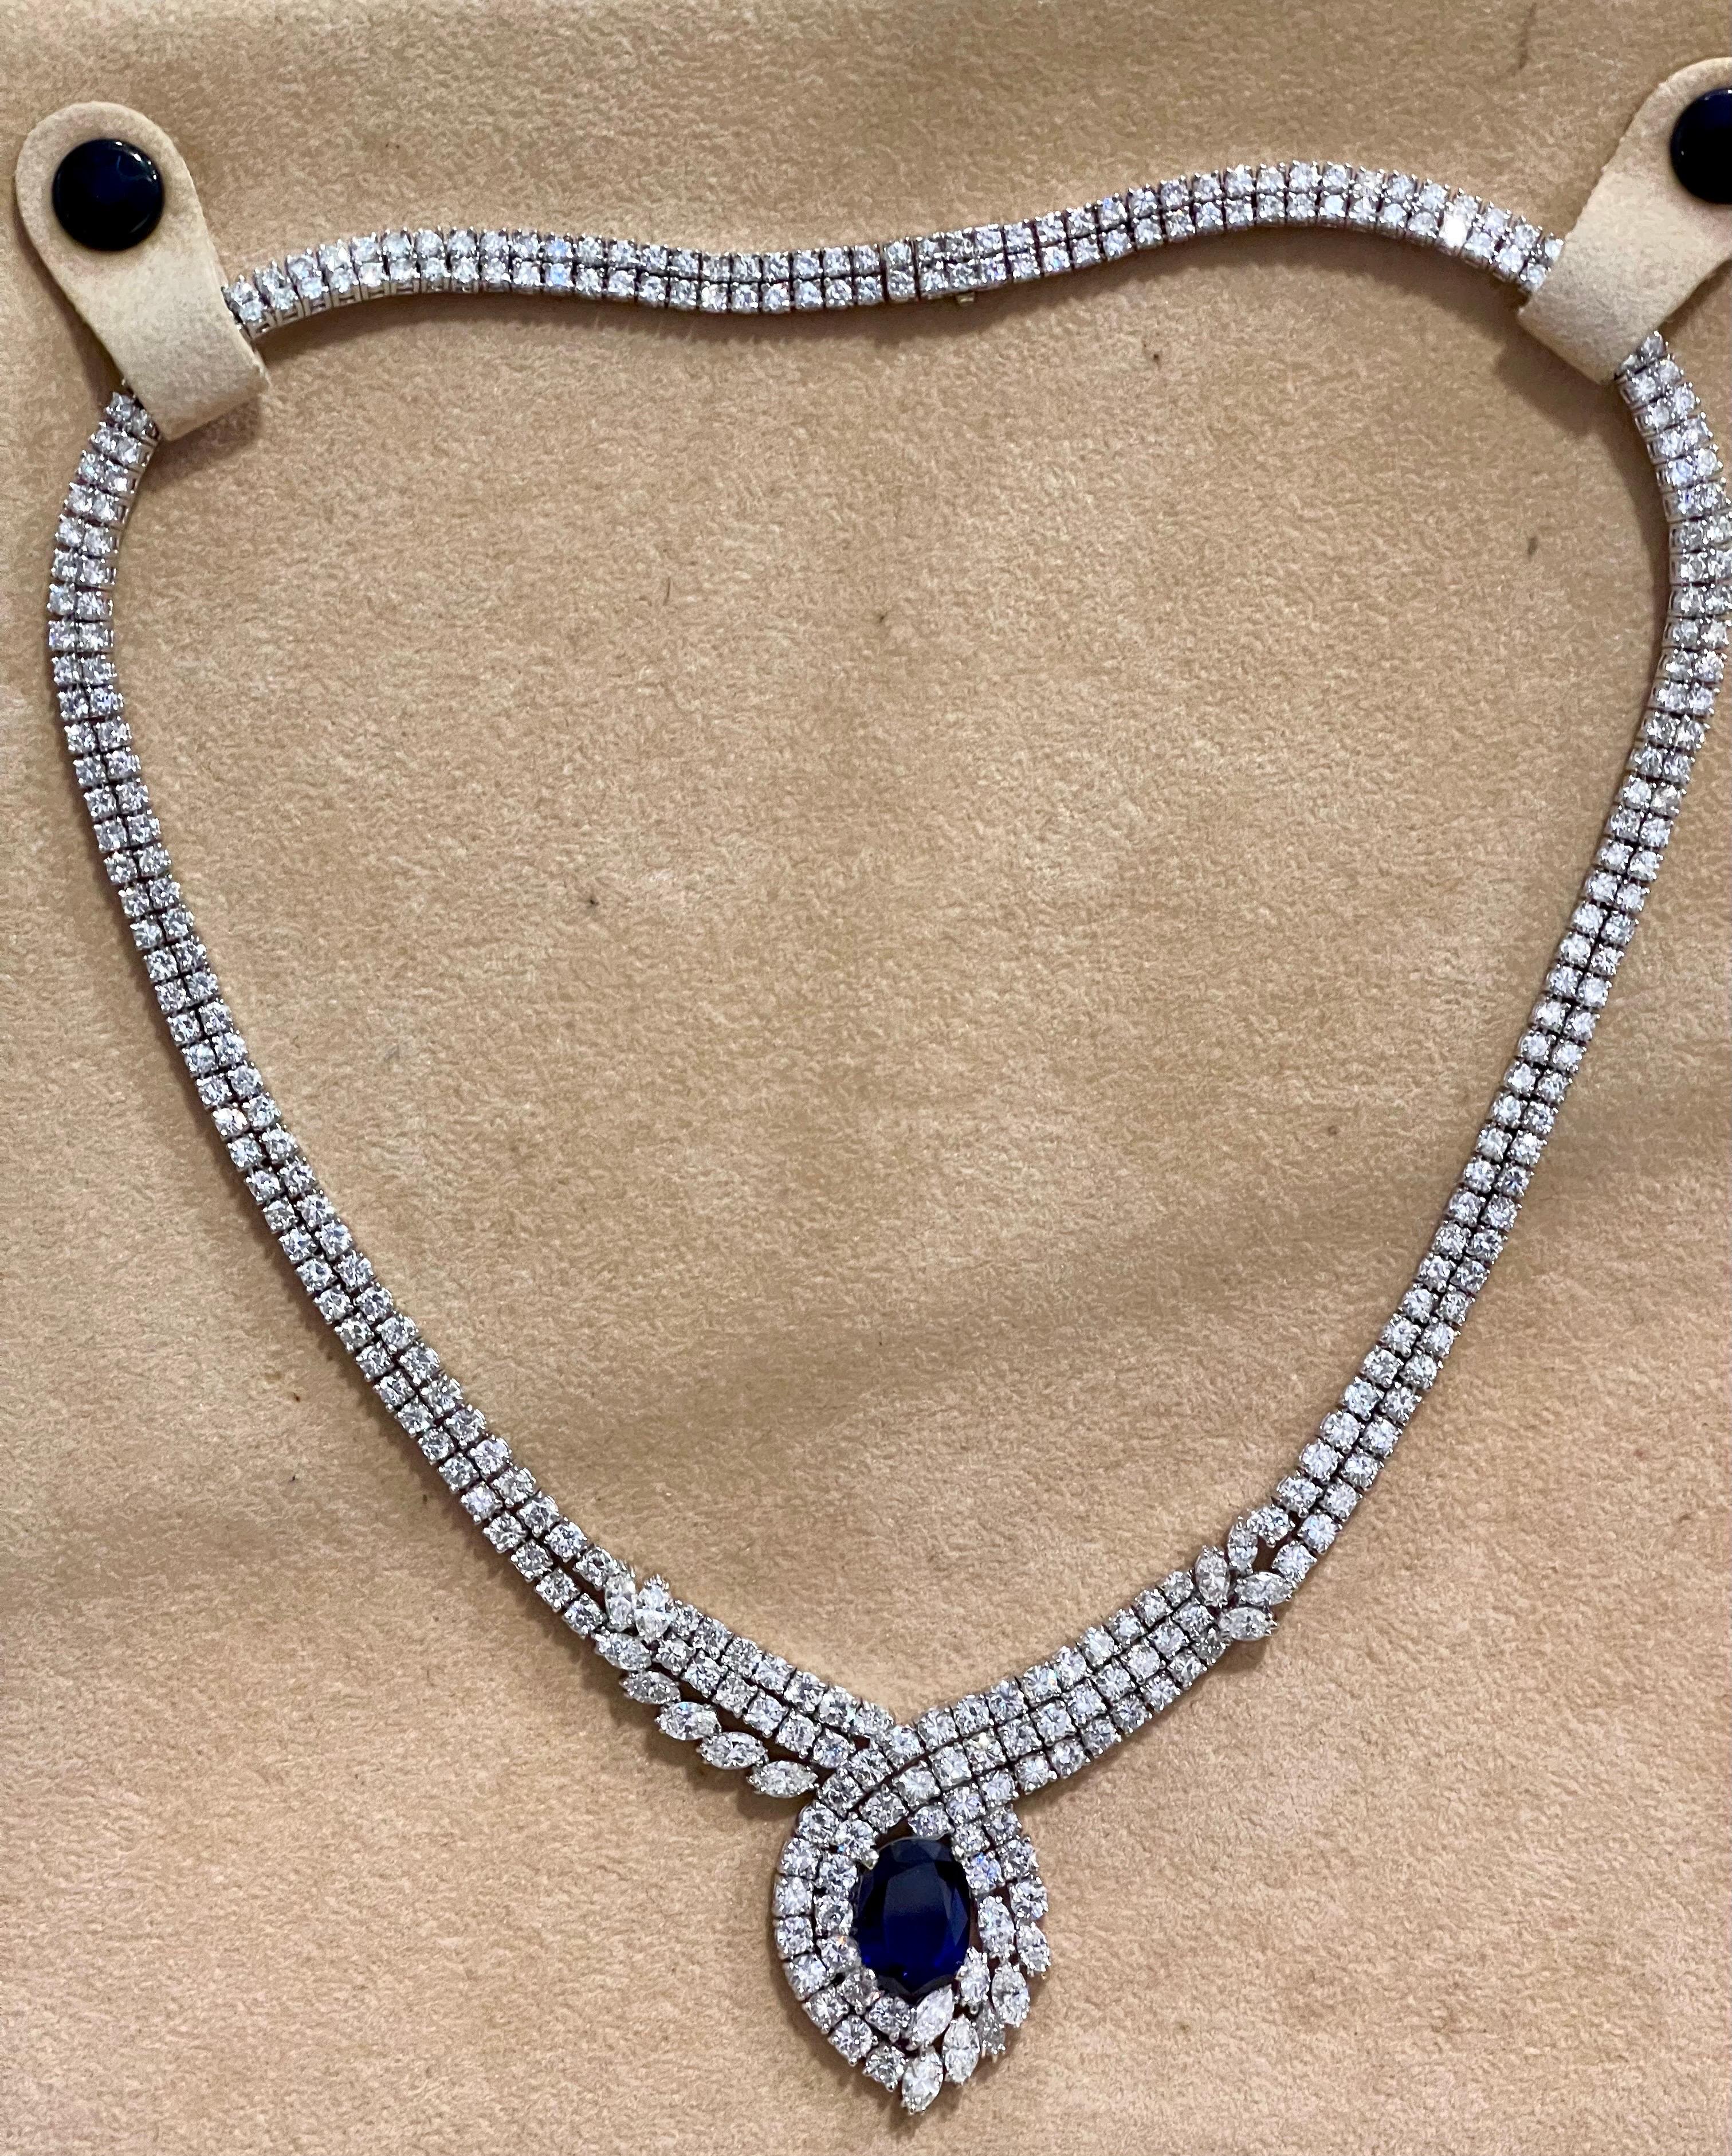 Vintage GIA Certified 6.5Ct Ceylon Sapphire & 32 Ct Diamond Necklace 18K W Gold For Sale 2